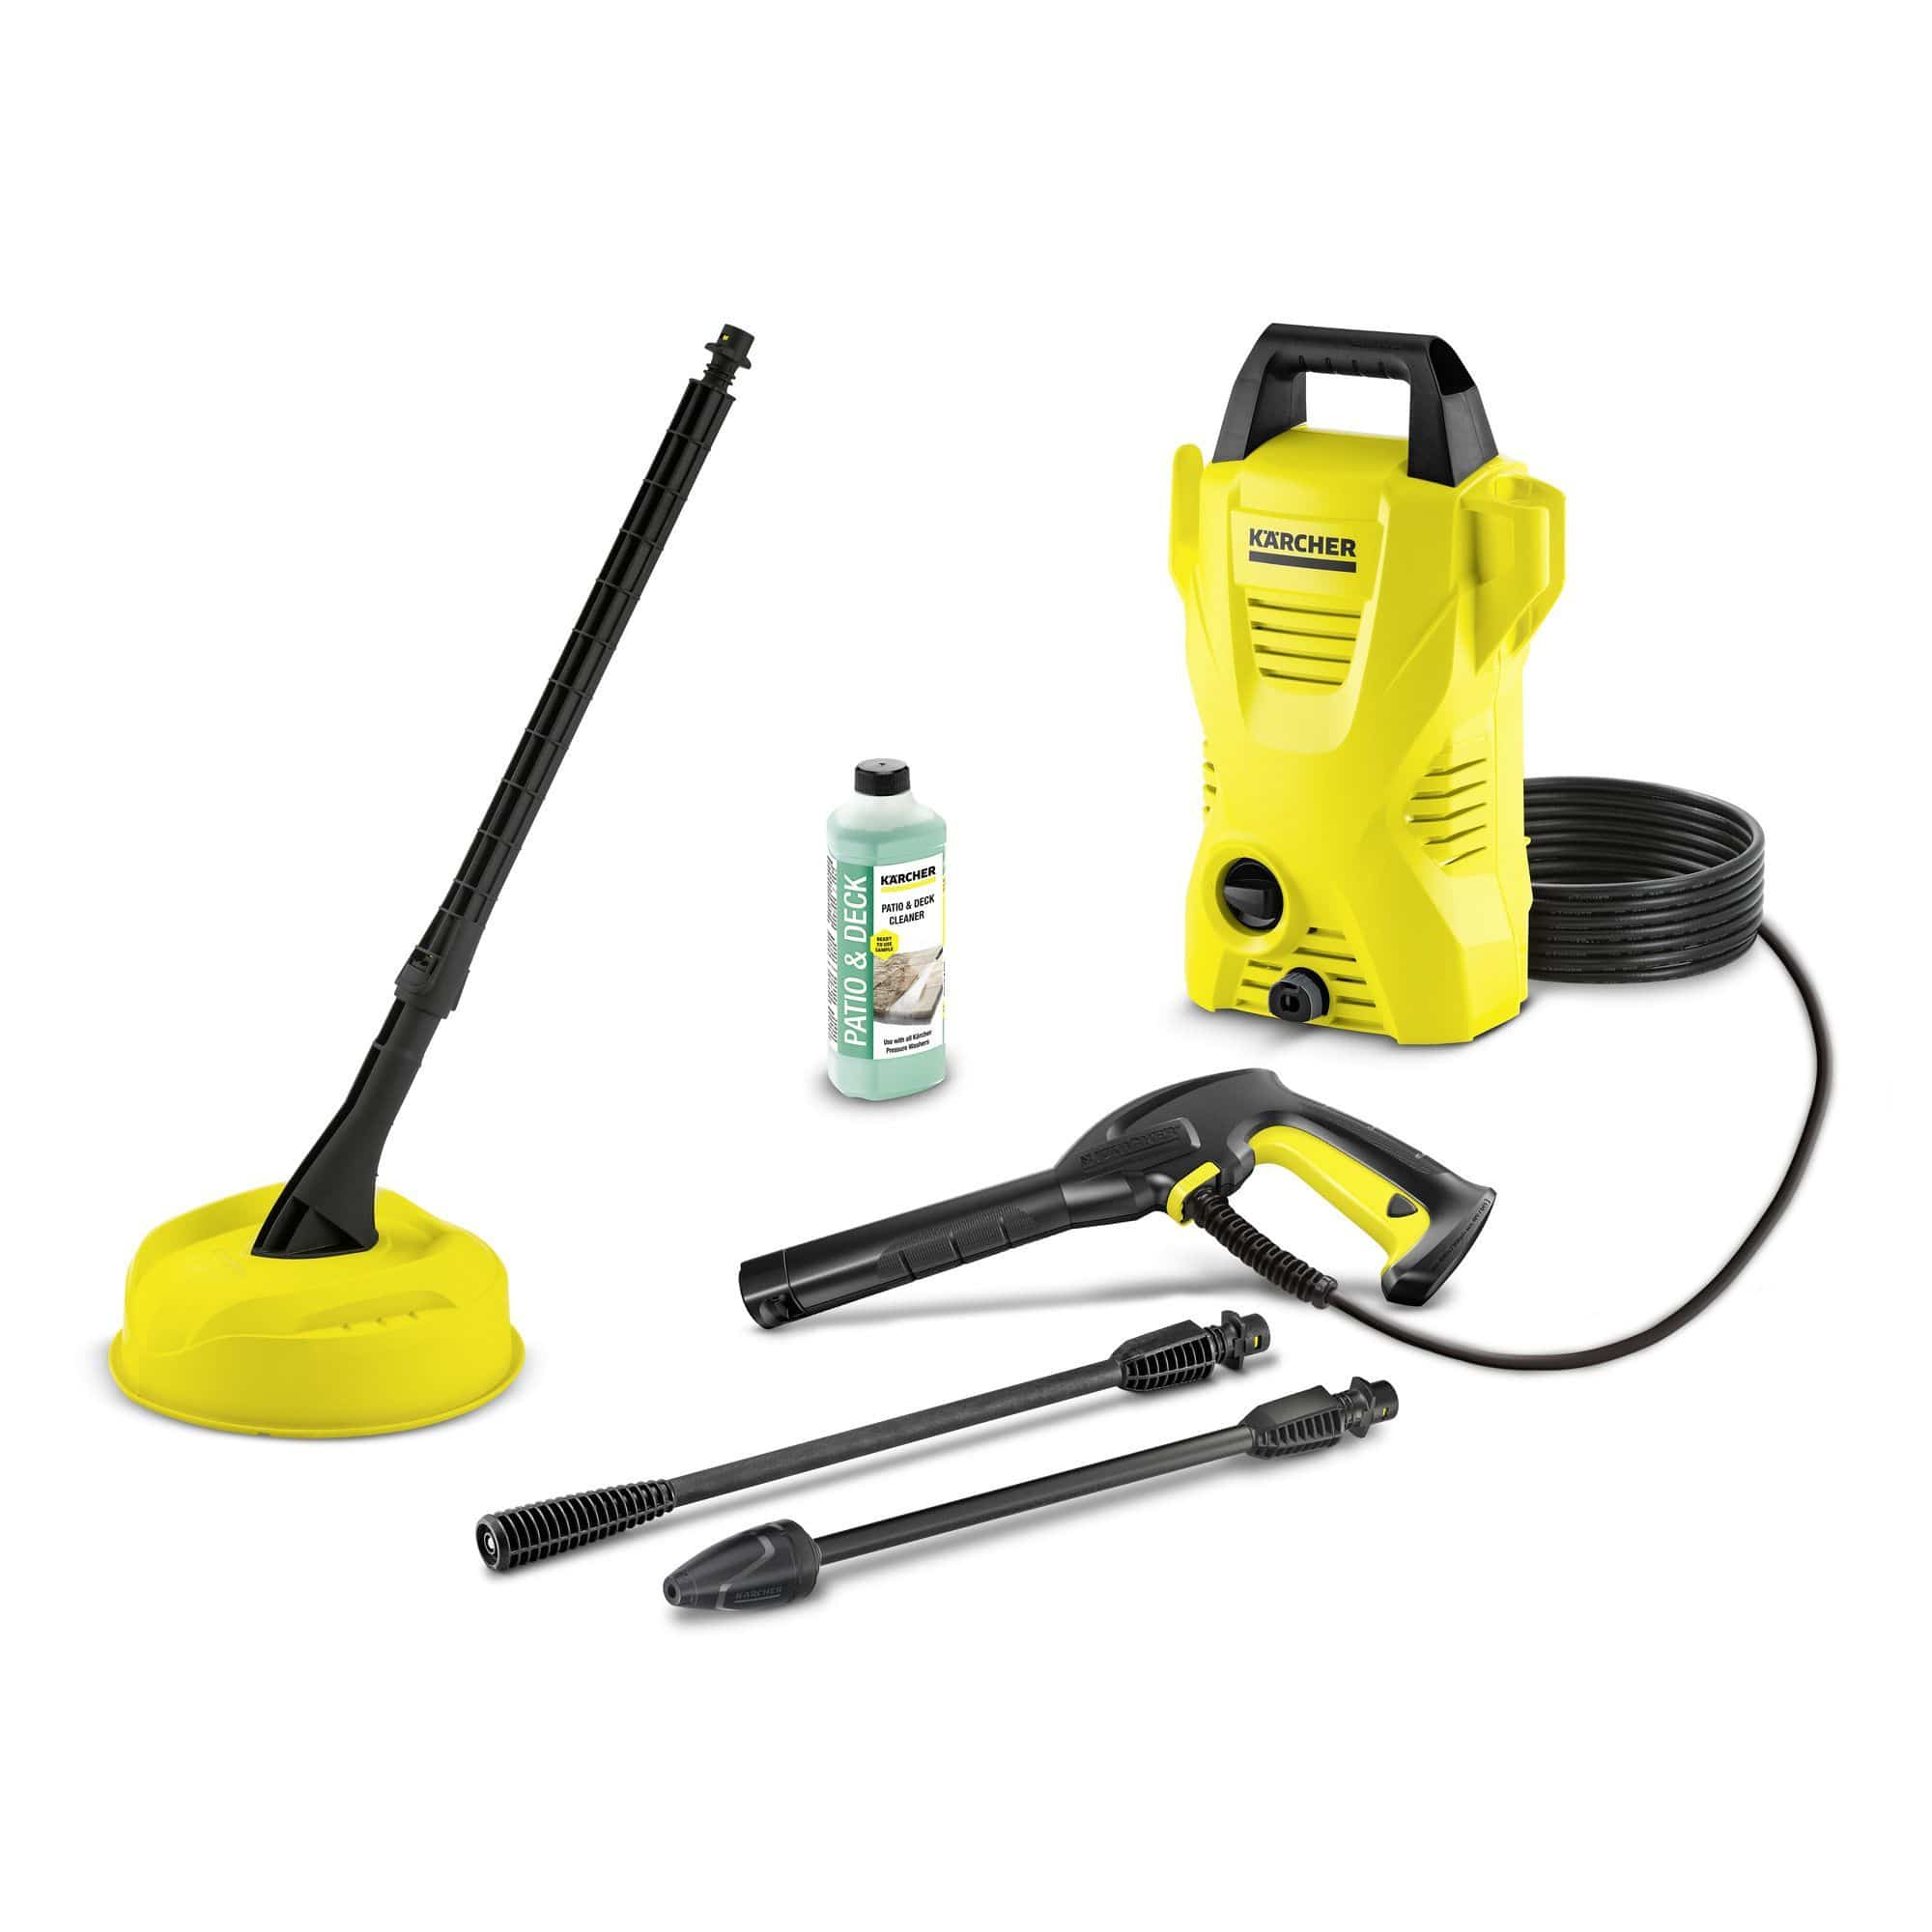 Karcher K2 Compact Car & Home Pressure Washer 240V 110 bar | Supply Master | Accra, Ghana Tools Building Steel Engineering Hardware tool